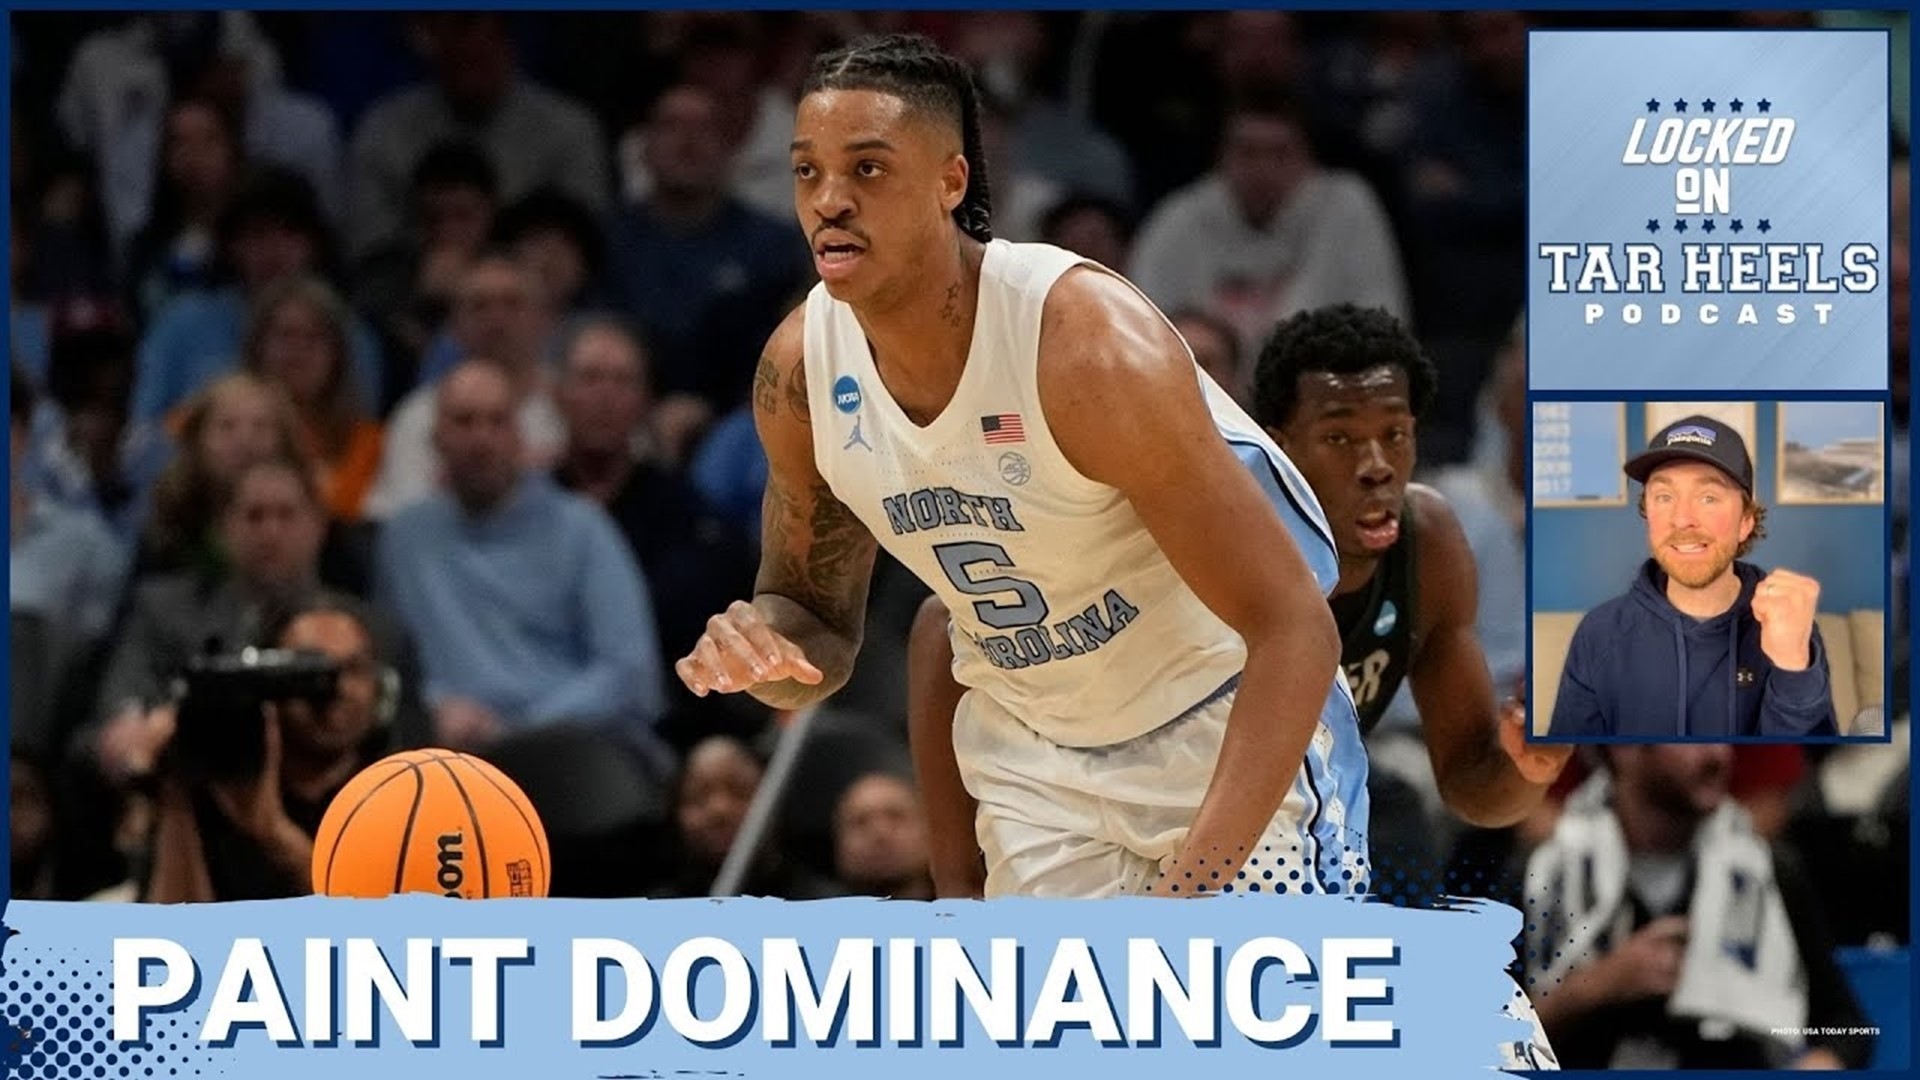 North Carolina is moving on to the second round of the NCAA Tournament thanks to dominant performance over Wagner, 90-62.